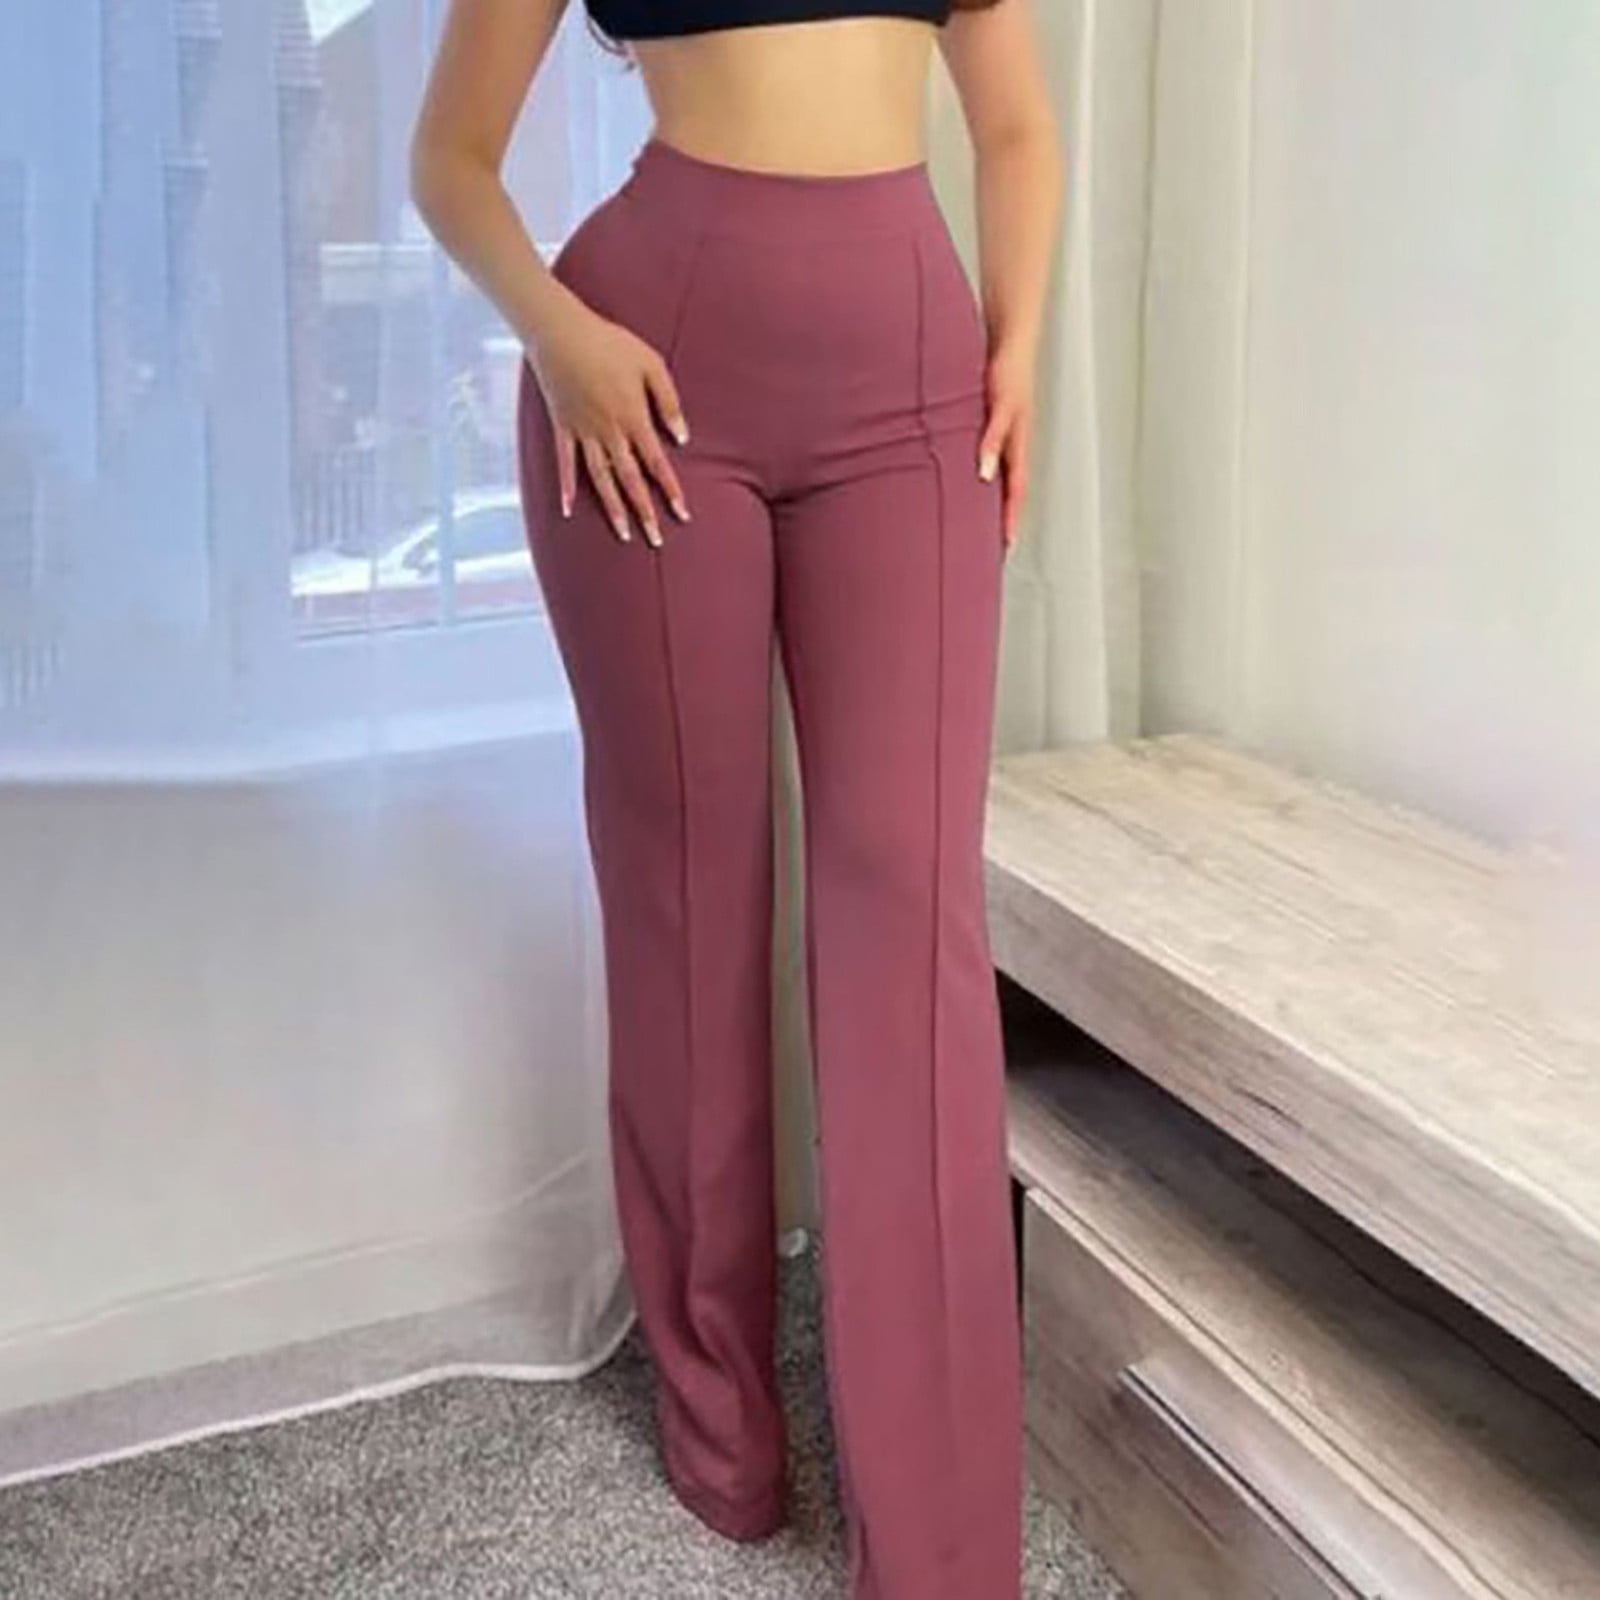 YWDJ Bell Bottom Pants for Women 70s High Waist High Rise Flared Bell  Bottom Elastic Waist Casual Stretchy Long Pant Fashion Comfortable Solid  Color